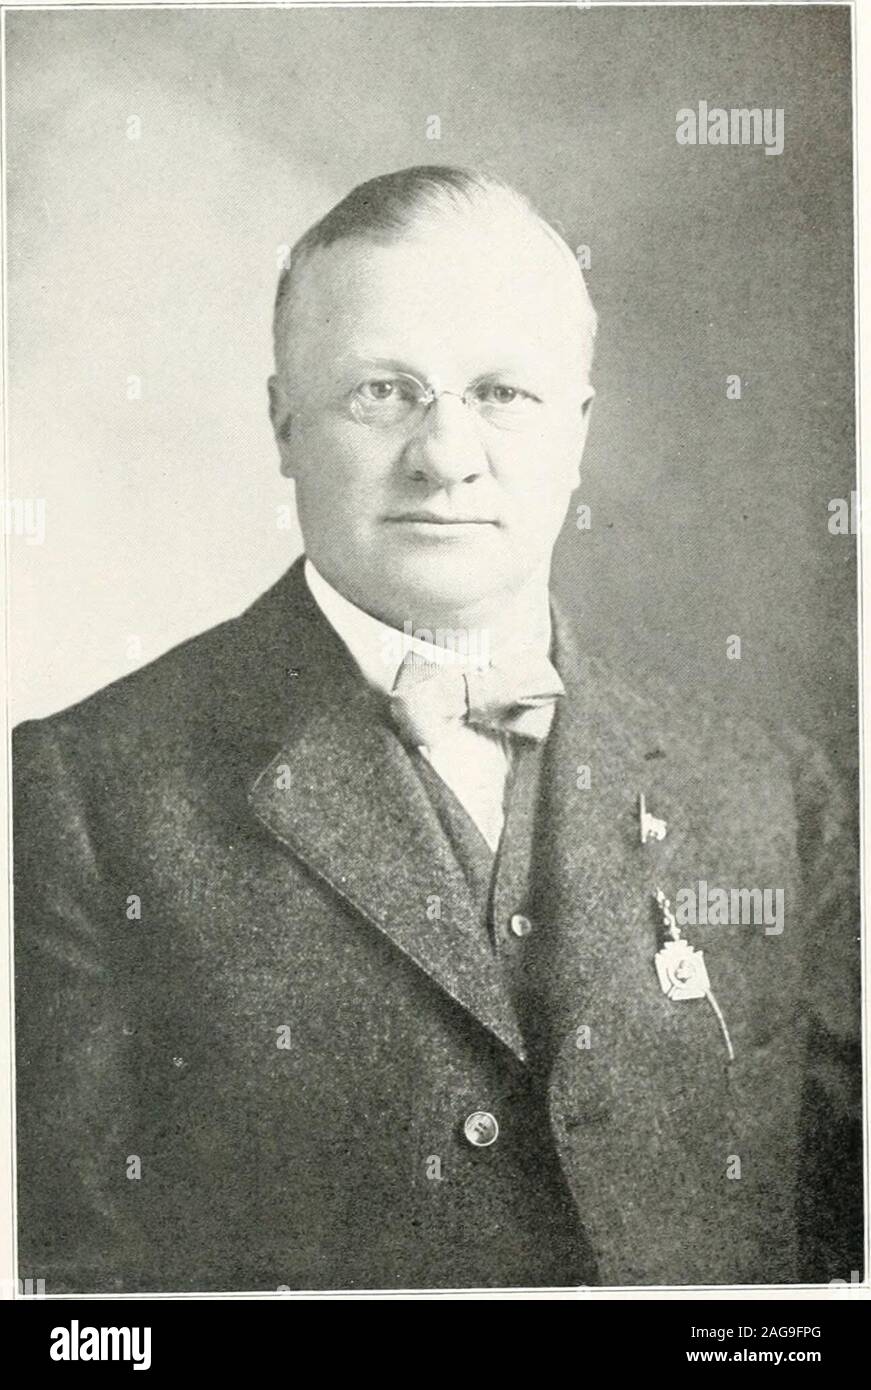 . History of Winnebago County and Hancock County, Iowa, a record of settlement, organization, progress and achievement ... ears of that period as assistant cashier. He then resigned to accept a positionwith Leavitt & Johnson, private bankers, by whom he was employed during apart of the years 1896 and 1897. He next became cashier of the State SavingsBank of Klemme, where he remained for two years, when he organized the StateSavings Bank of Kanawha, now the First National Bank. In that institution hecontinued as cashier from June 1, 1899, until July 1, 1905, when he resignedand accepted the cash Stock Photo